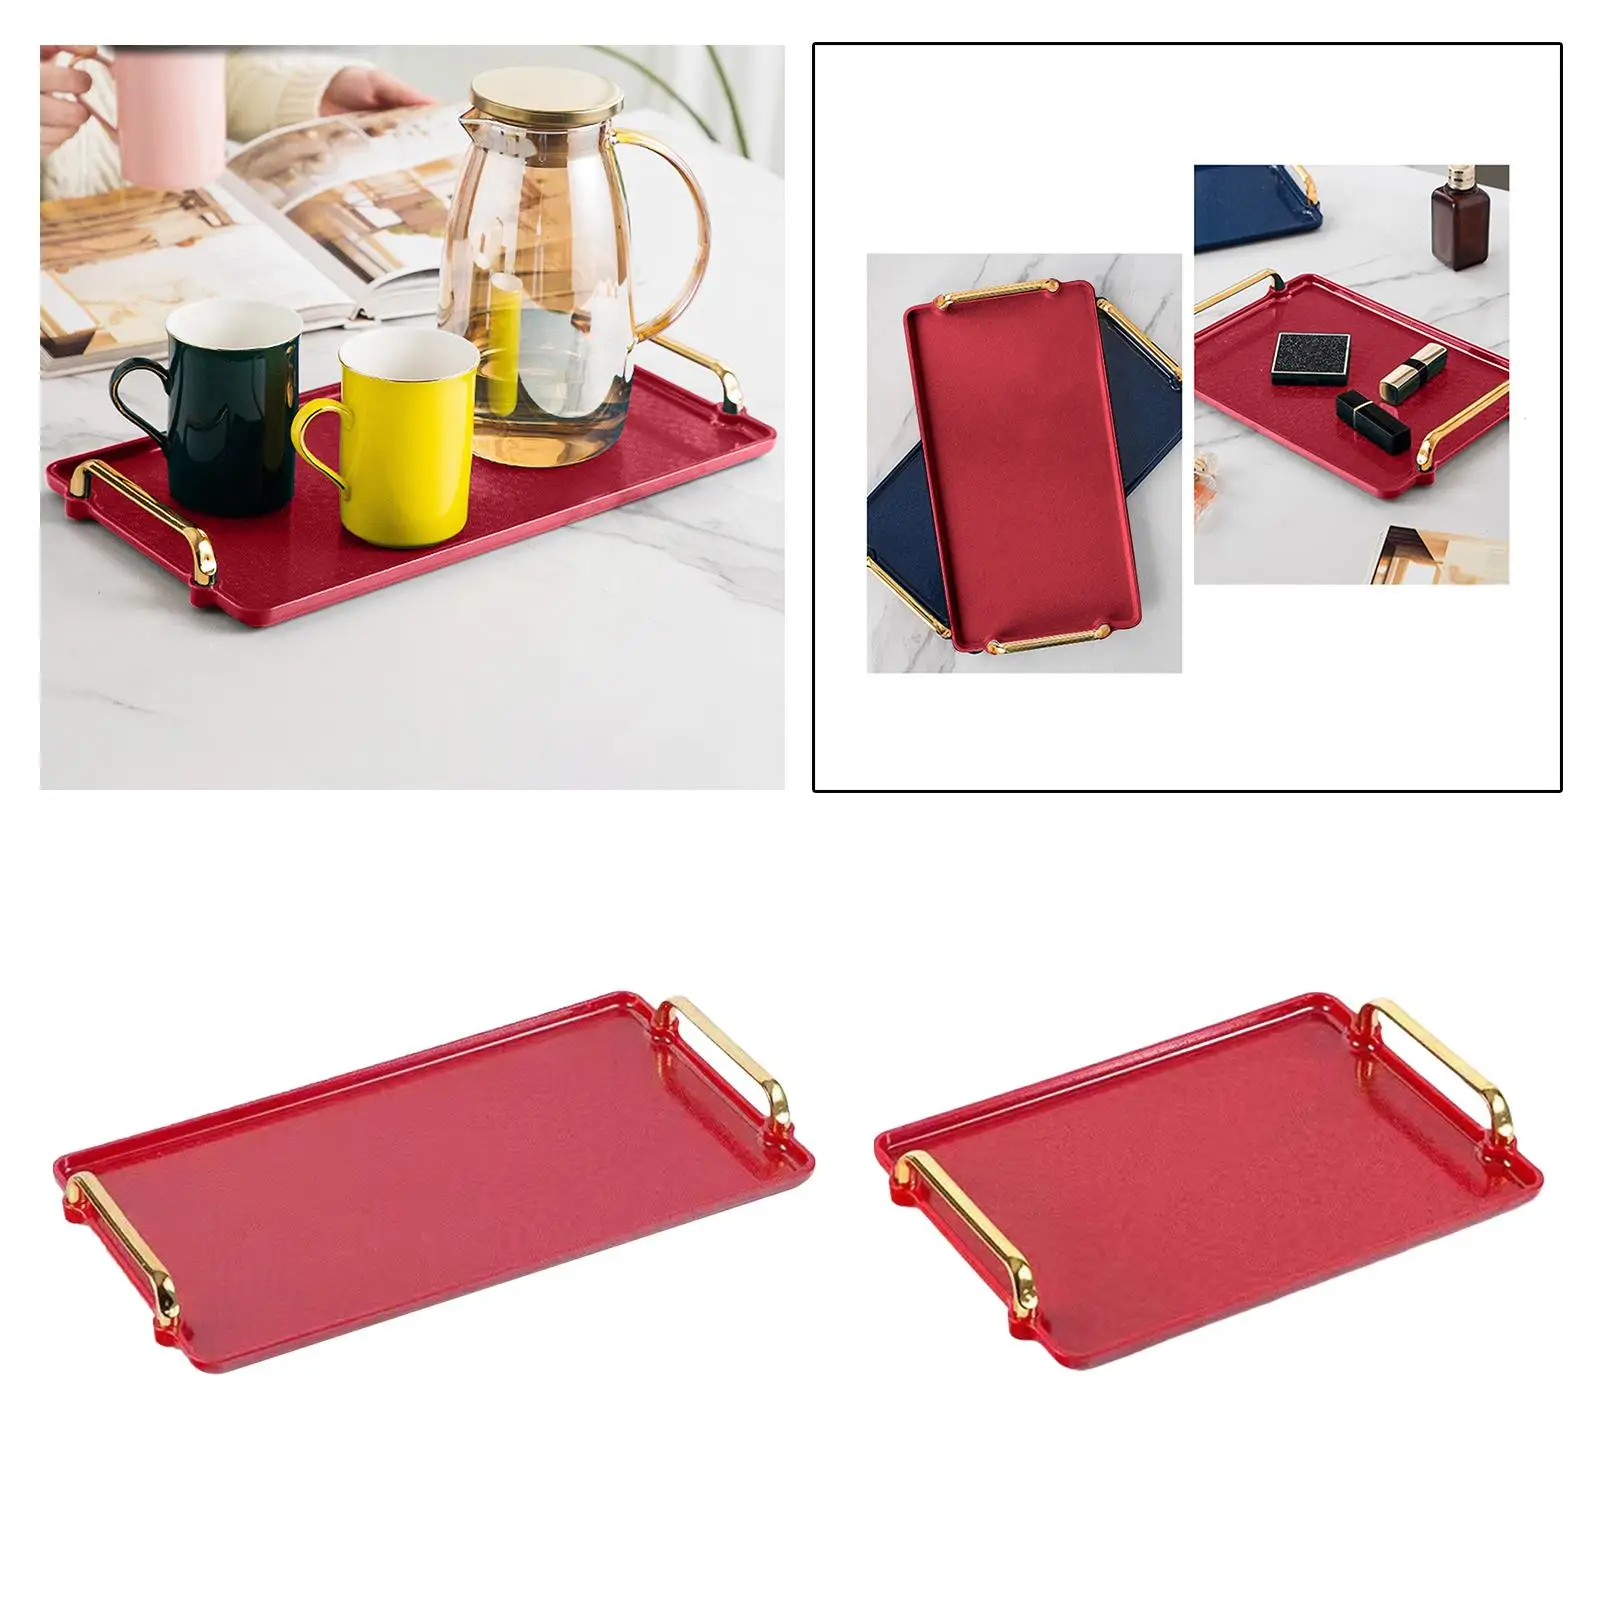 Serving Tray with Handles Luxury Style Reusable platter Rectangular Fruit Tray for Candies Snack Cookie Office